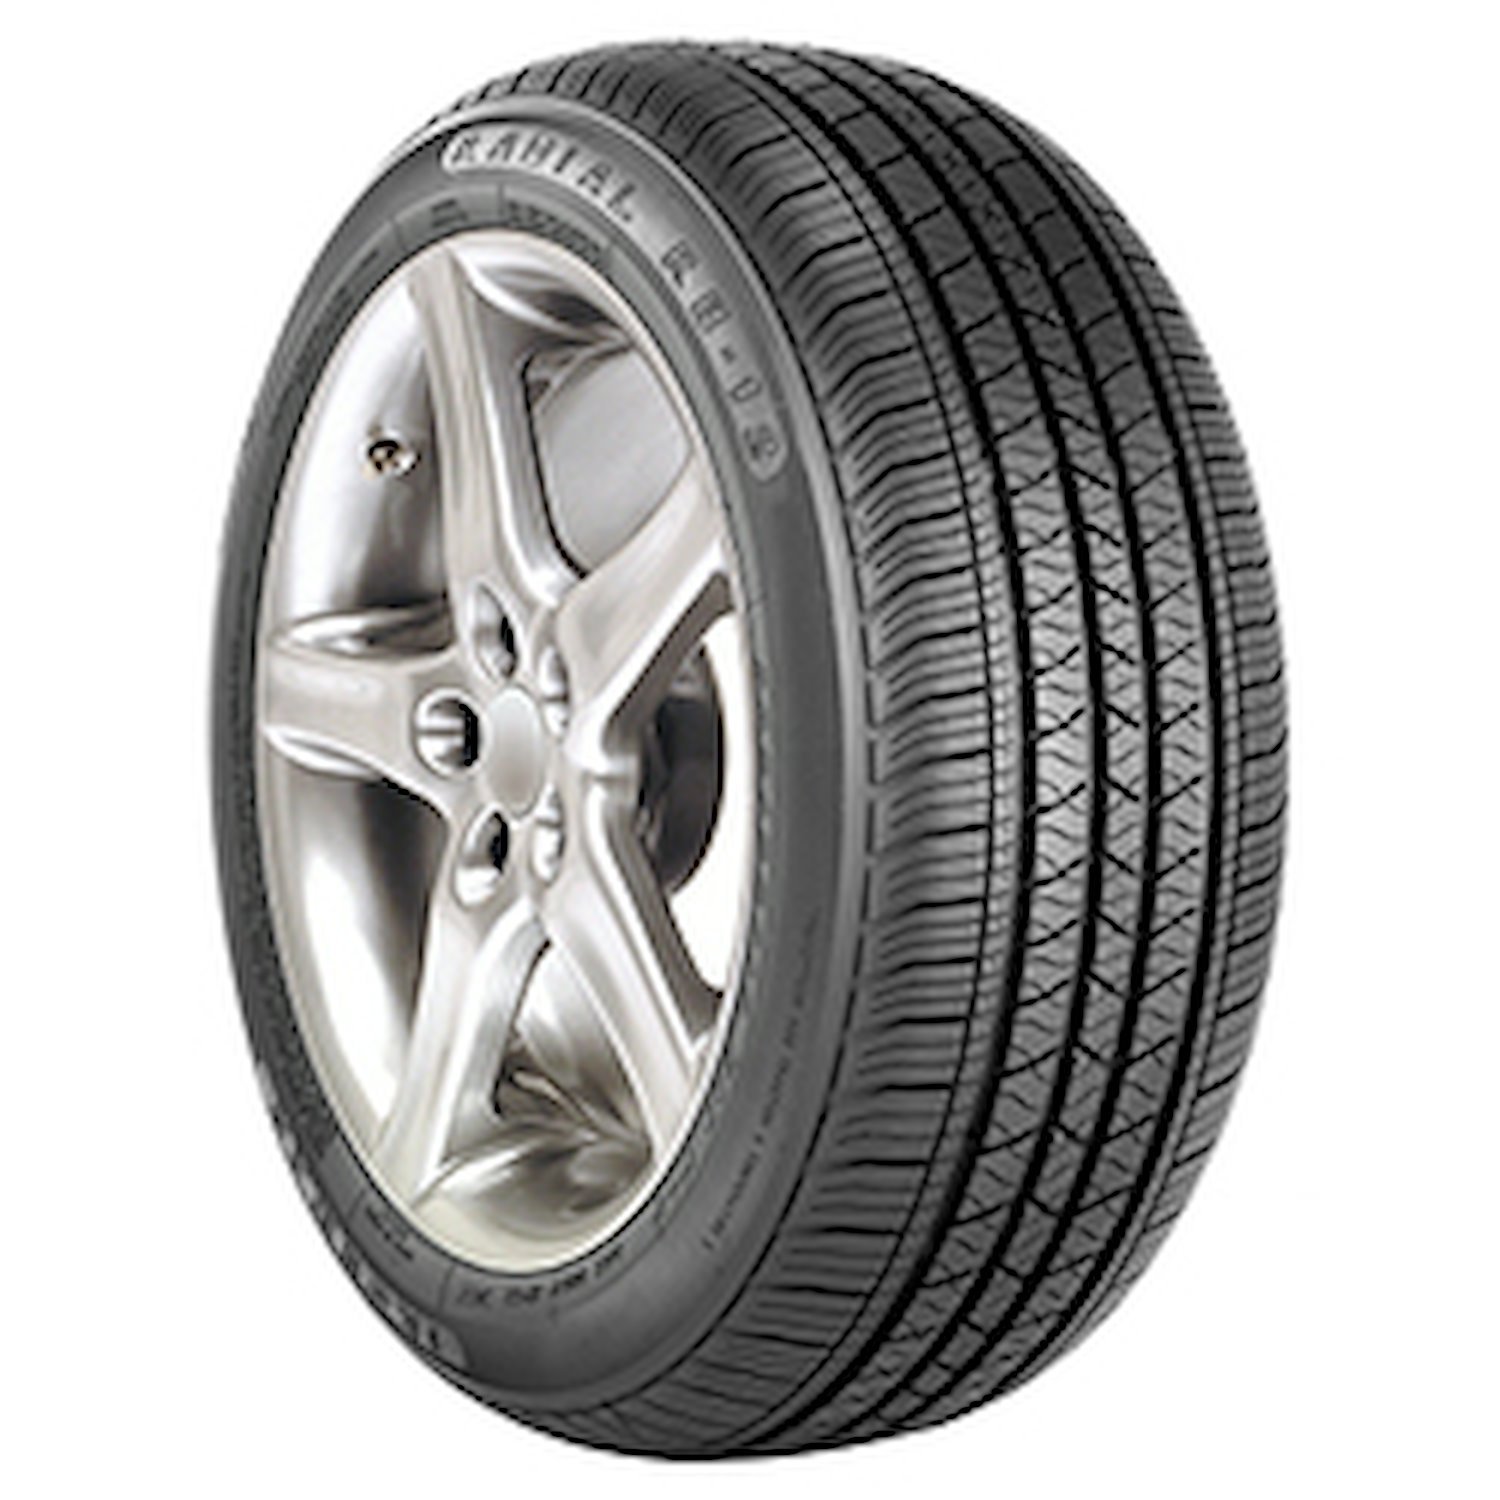 RB-12 Tire, 195/65R15 91T